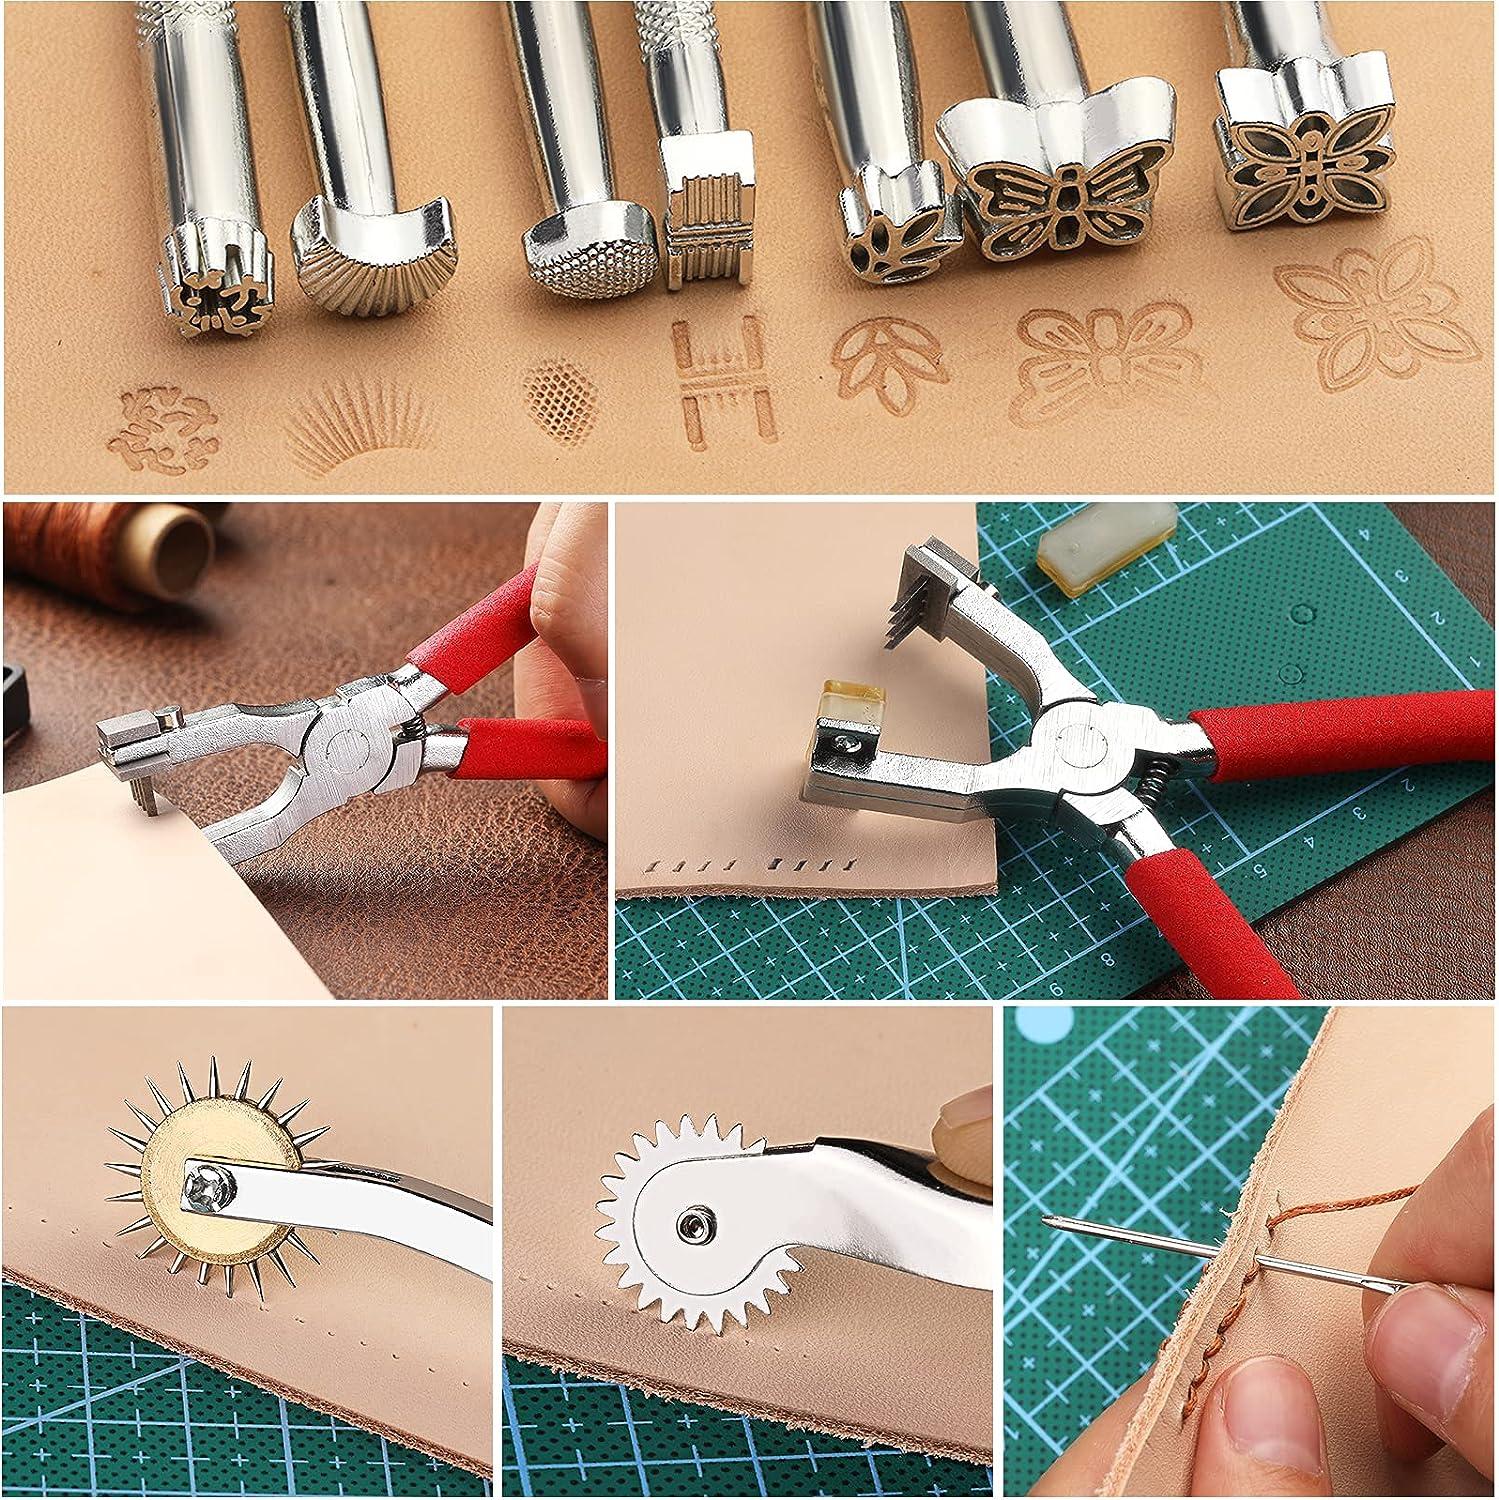 48pcs Leather Tools Kit, Leather Tools And Supplies, Leather Working Kits  Supplies With Leather Tool Box Prong Punch Edge Beveler Wax Threads Needles